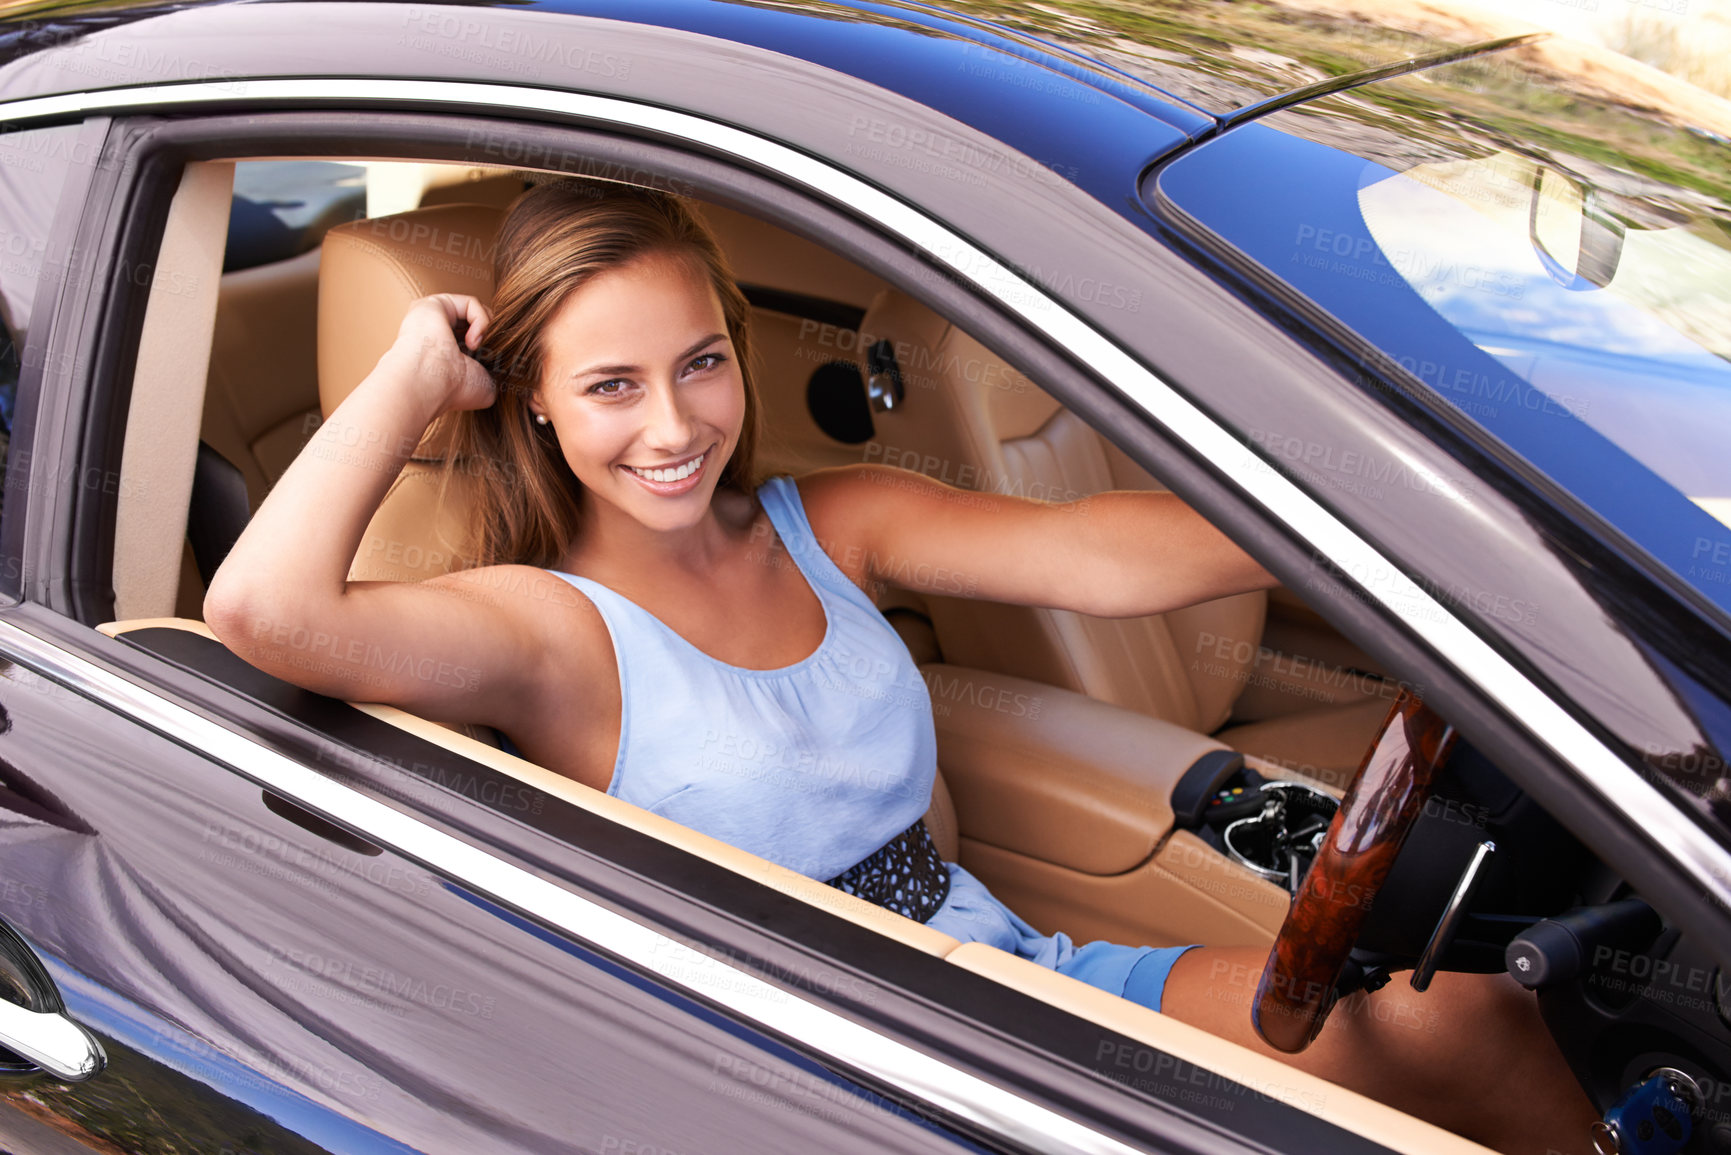 Buy stock photo Portrait, travel and happy woman in sports car, driving or road trip with motor vehicle by window in Canada. Person, face and luxury automobile for journey, vacation and adventure in transportation